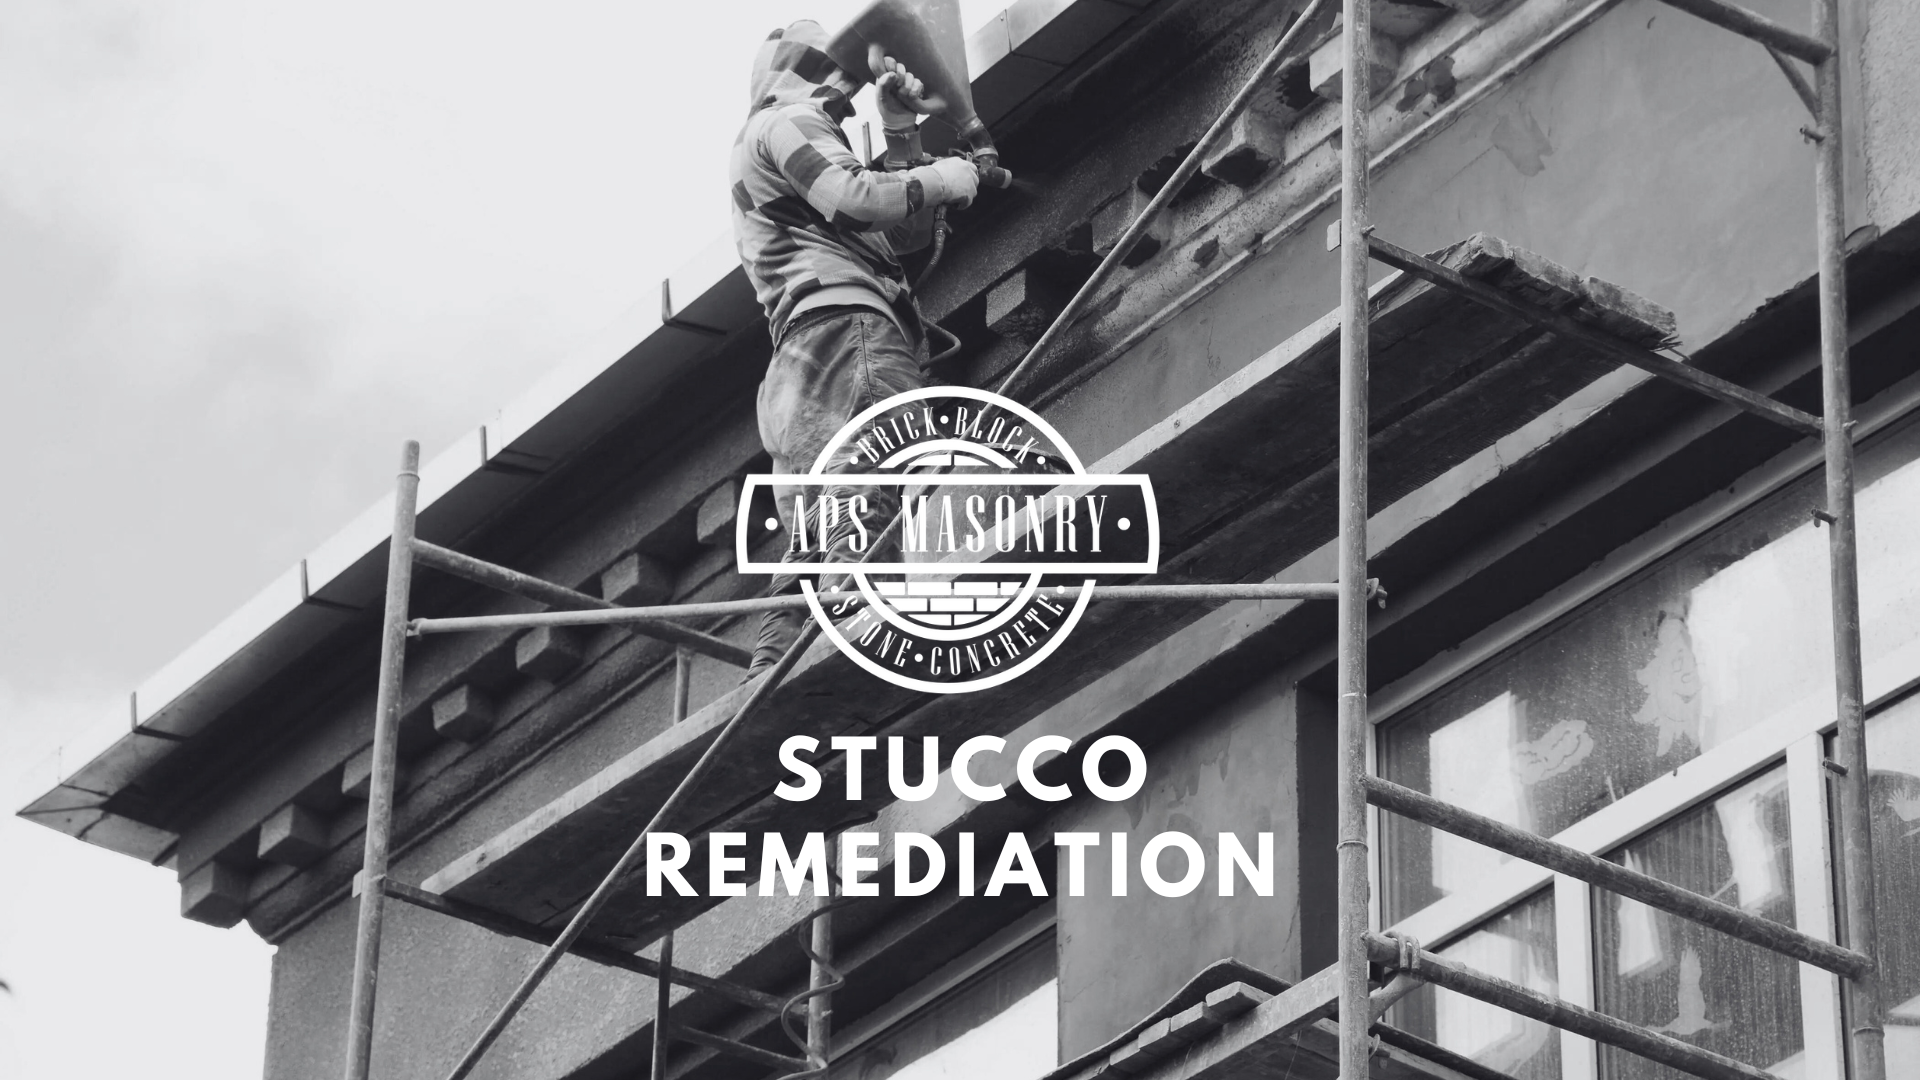 A monochrome image displaying a worker on scaffolding engaged in stucco remediation on the exterior of a building. The worker is wearing a hooded jacket and using a tool on the wall. The APS Masonry logo is superimposed in the center, and the text 